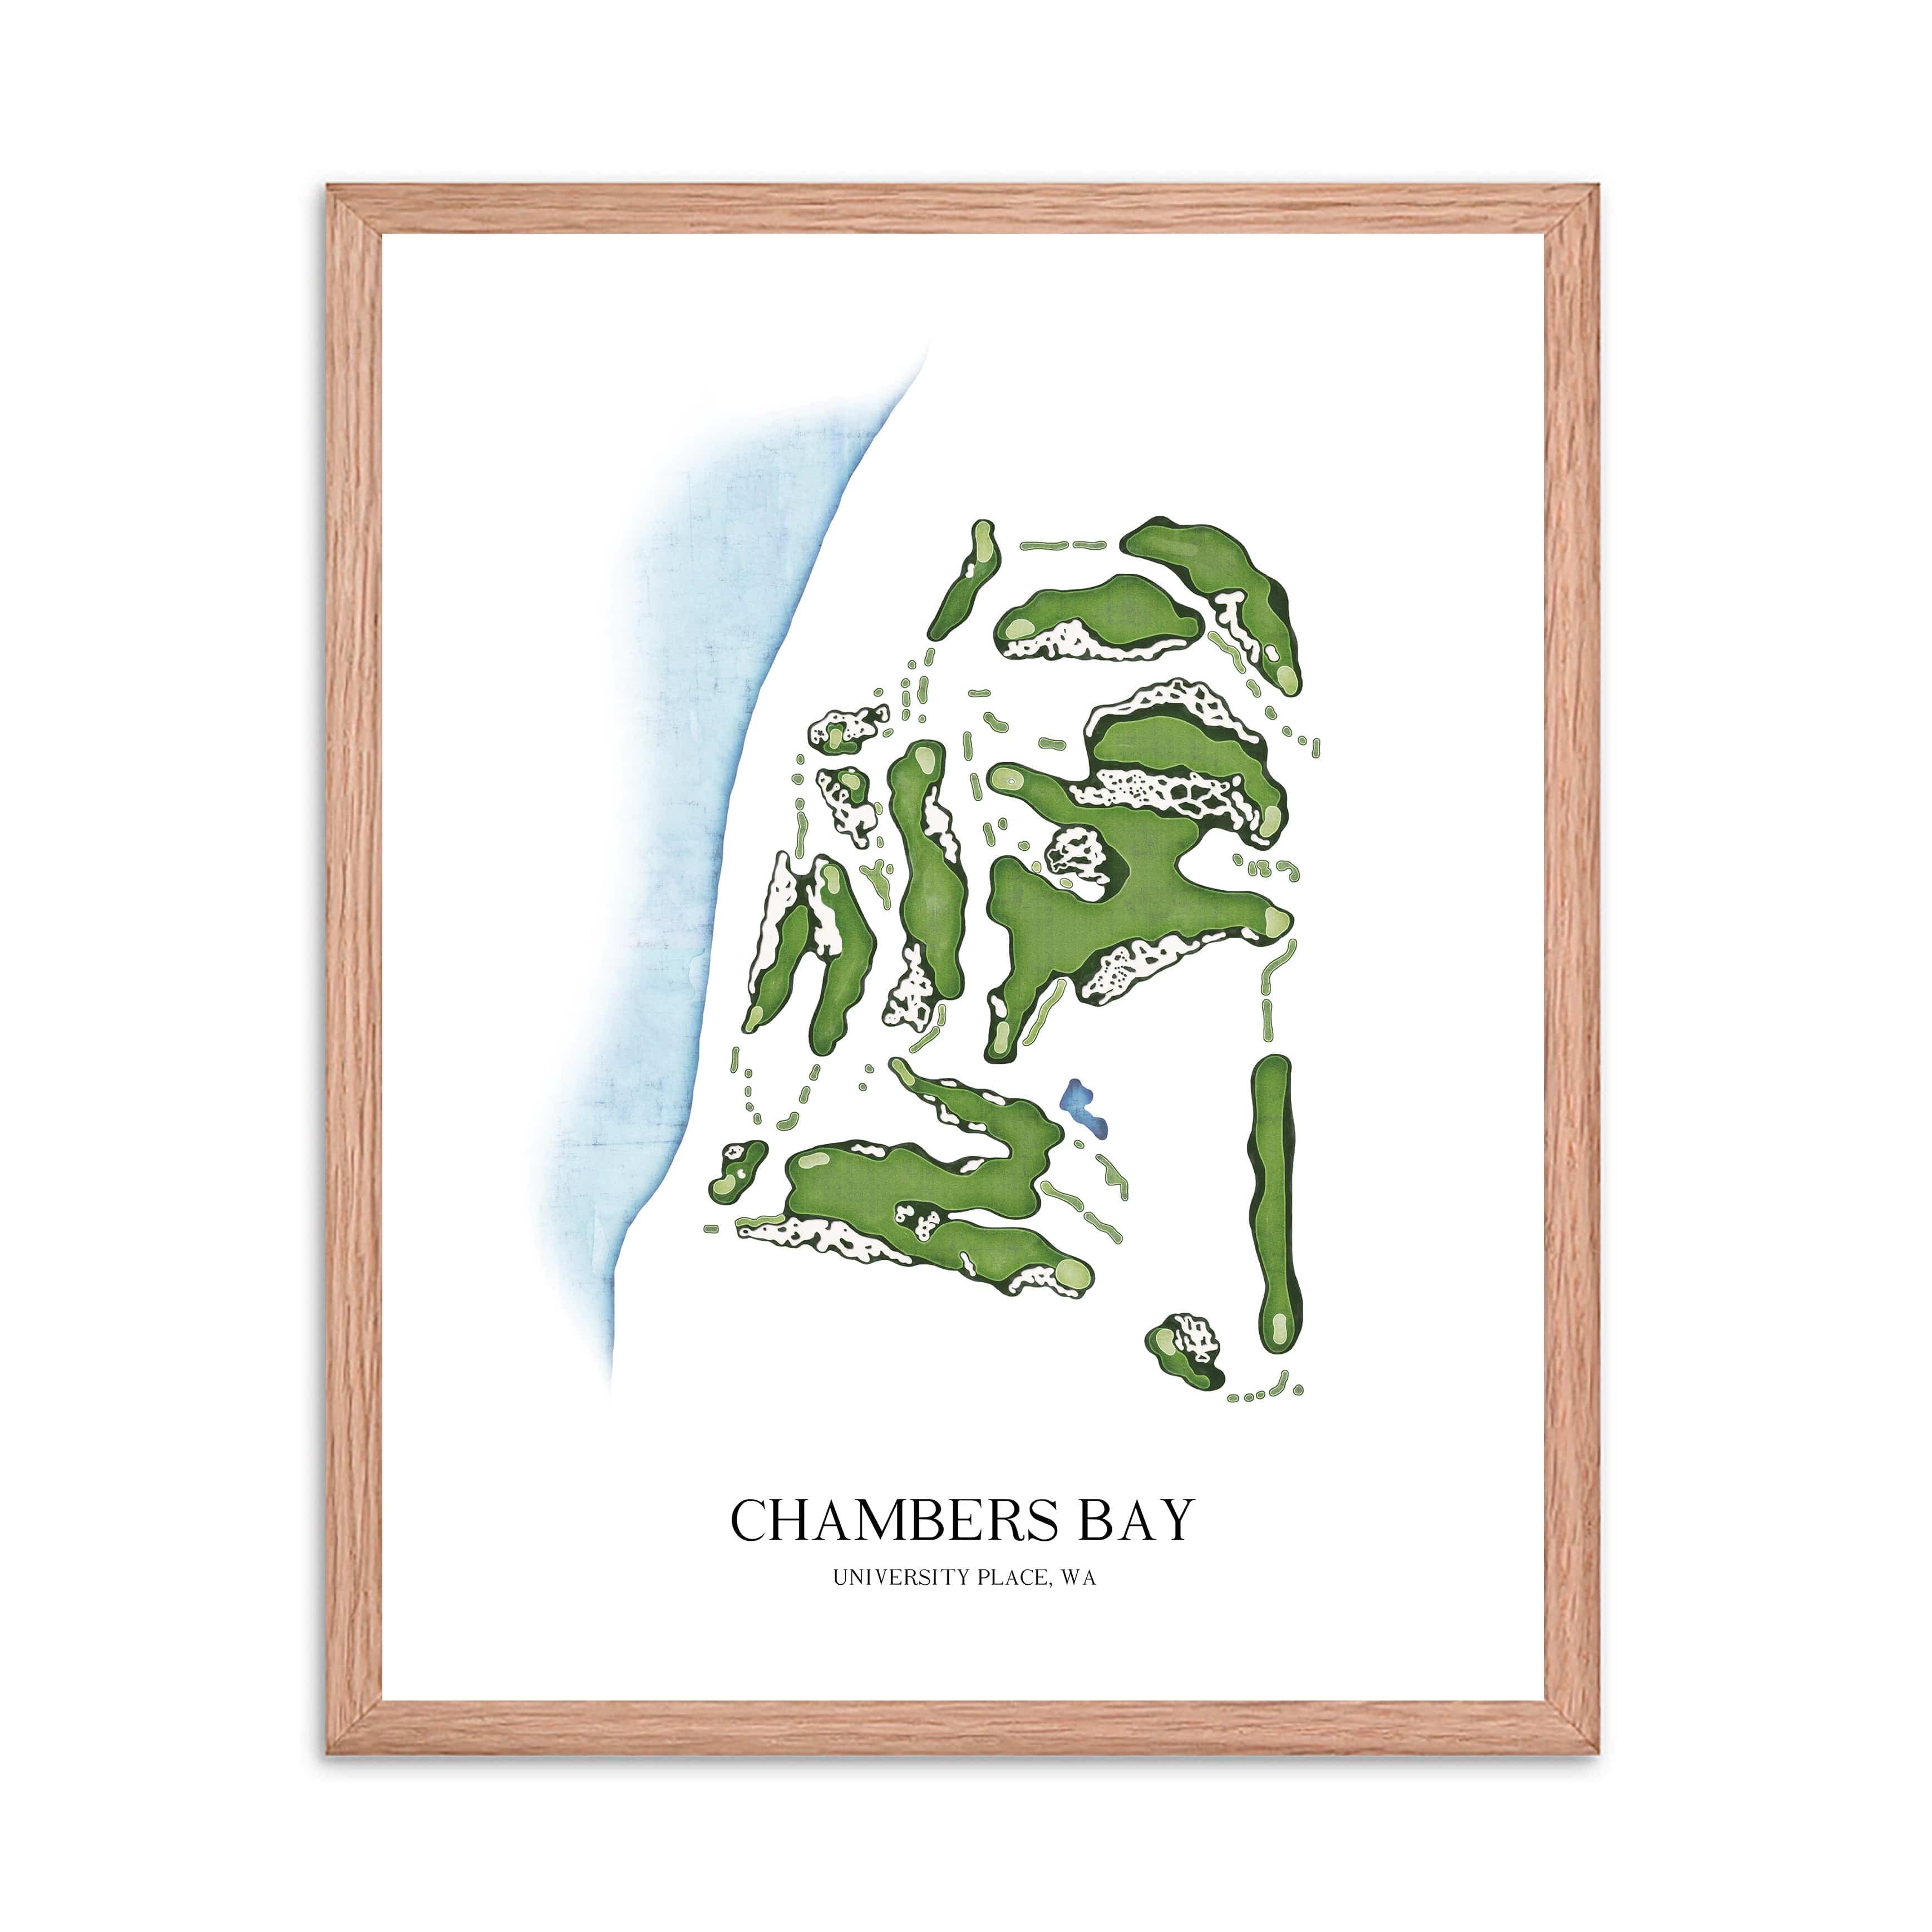 The 19th Hole Golf Shop - Golf Course Prints -  8" x 10" / Oak Chambers Bay Golf Course Map